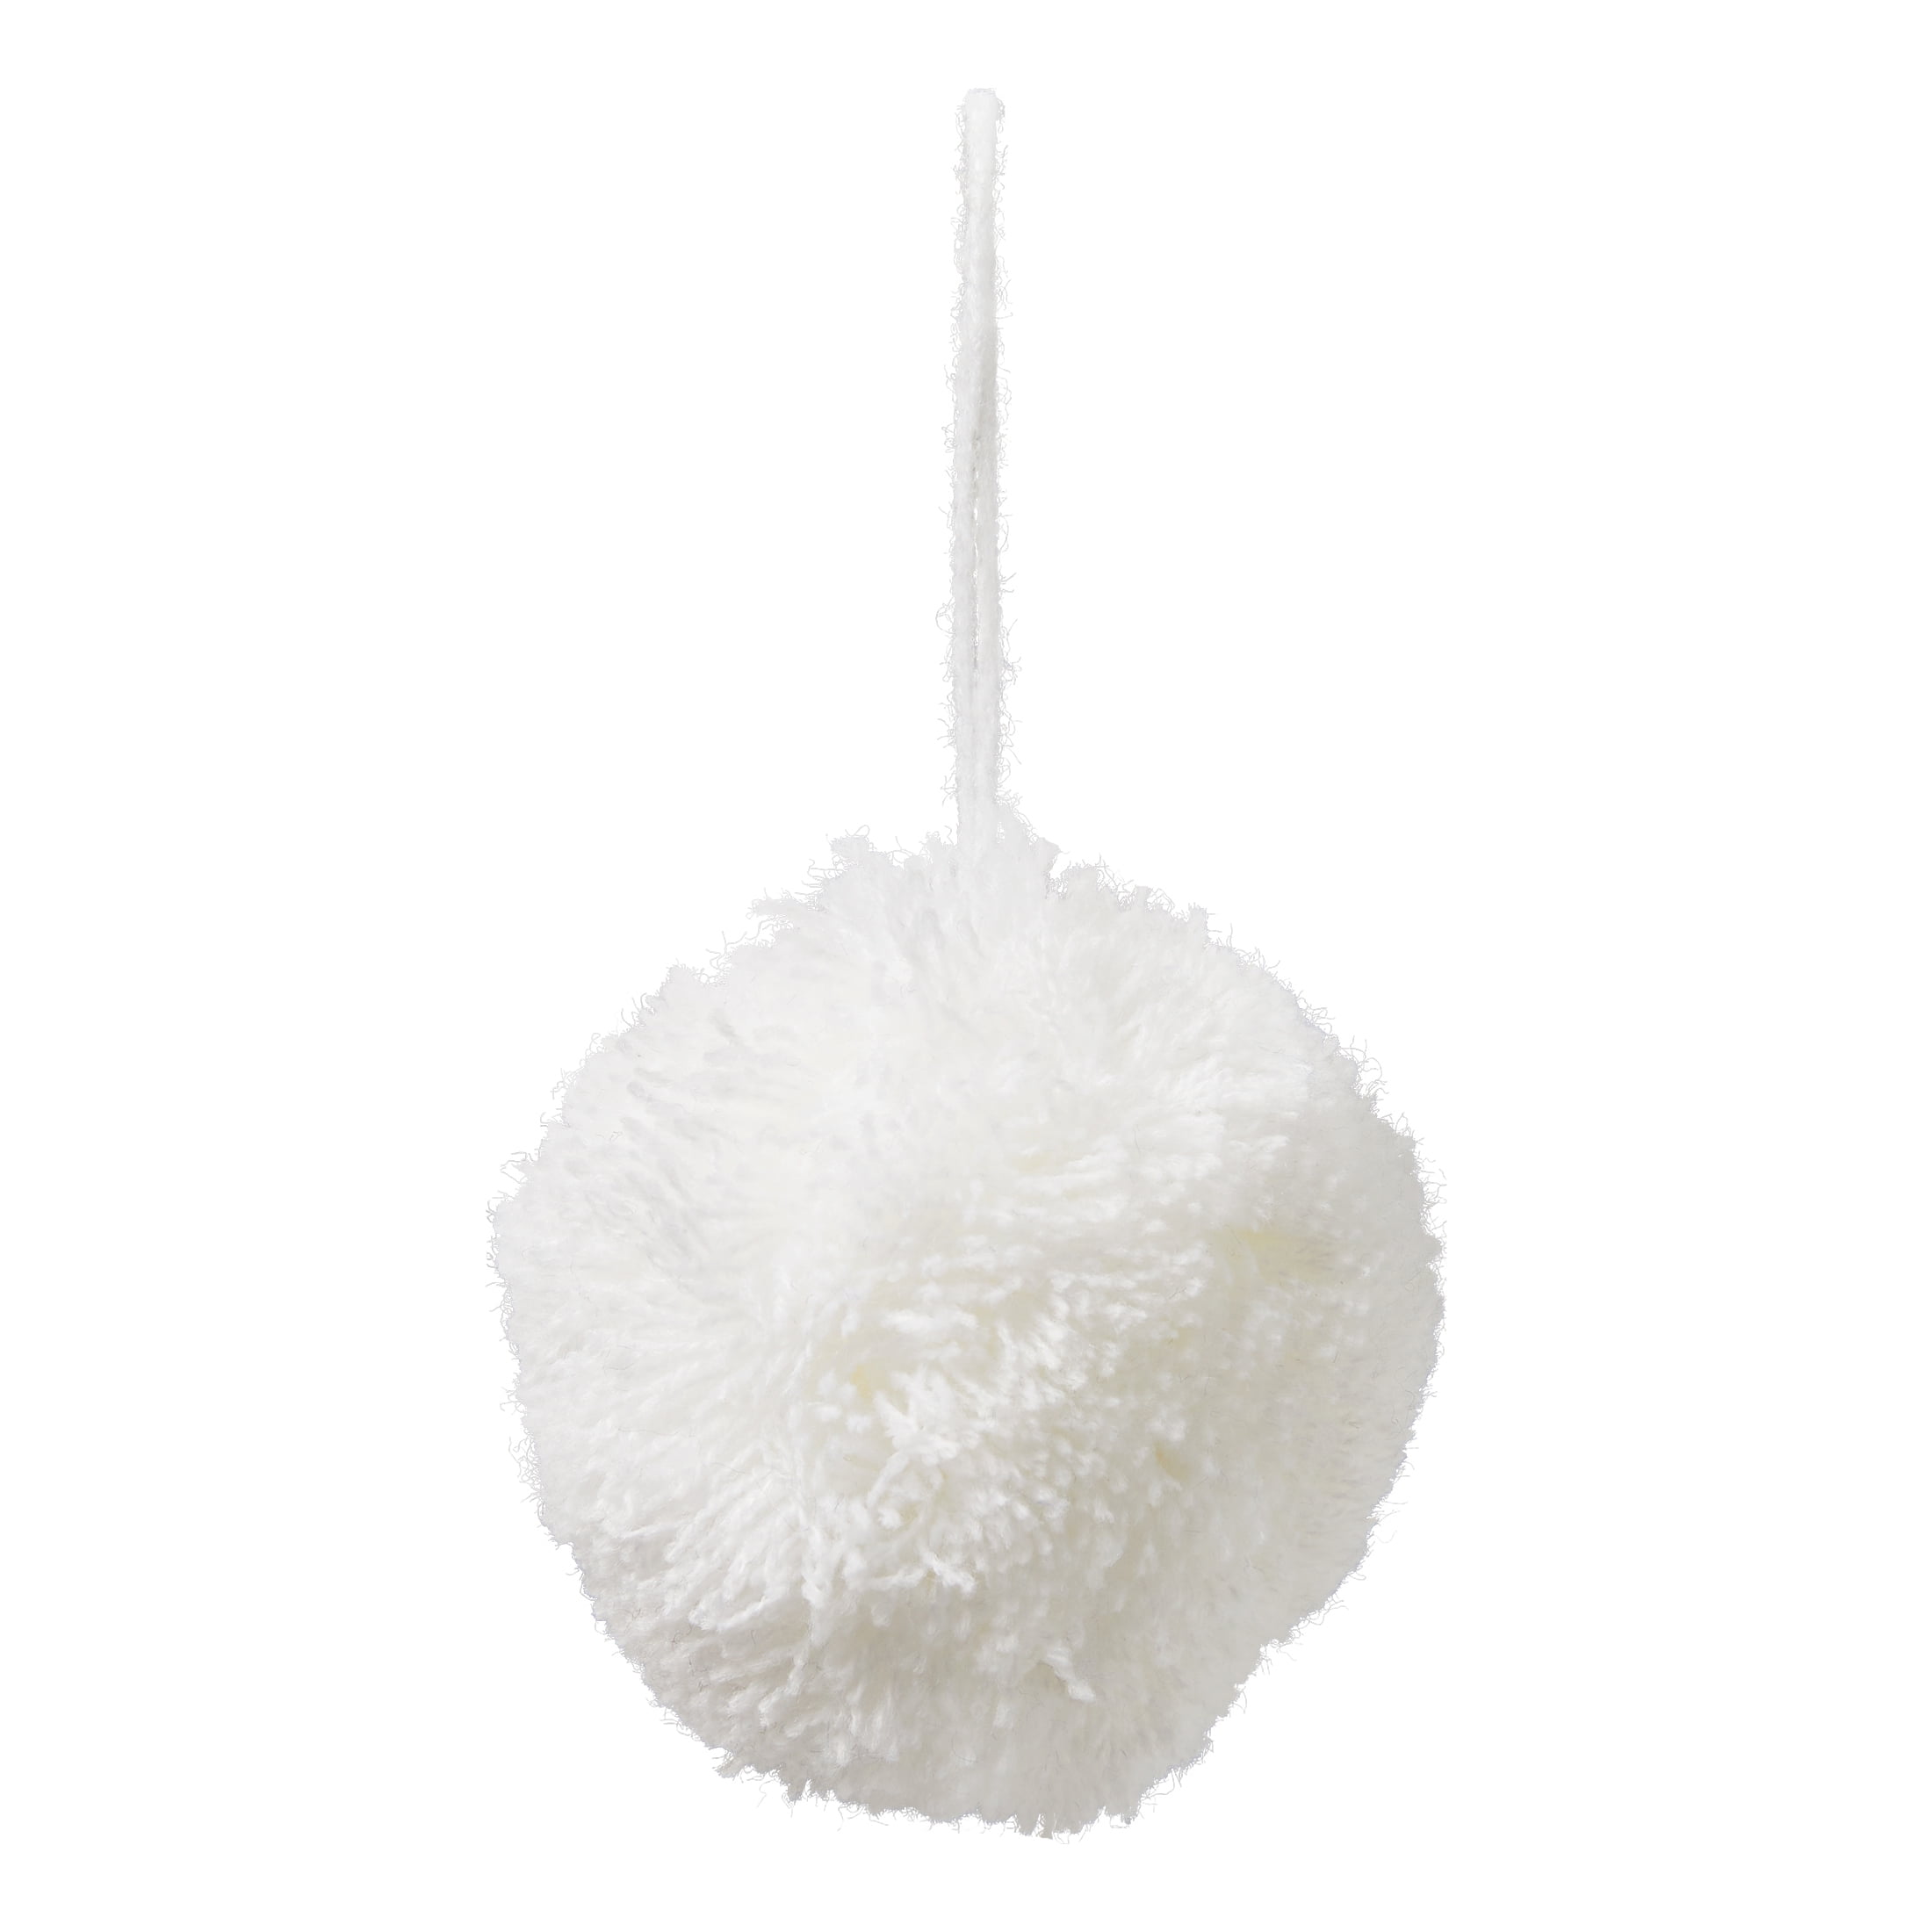 Offray White 3 Inch Acrylic Yarn Pom Pom great for craft projects, 1 Each